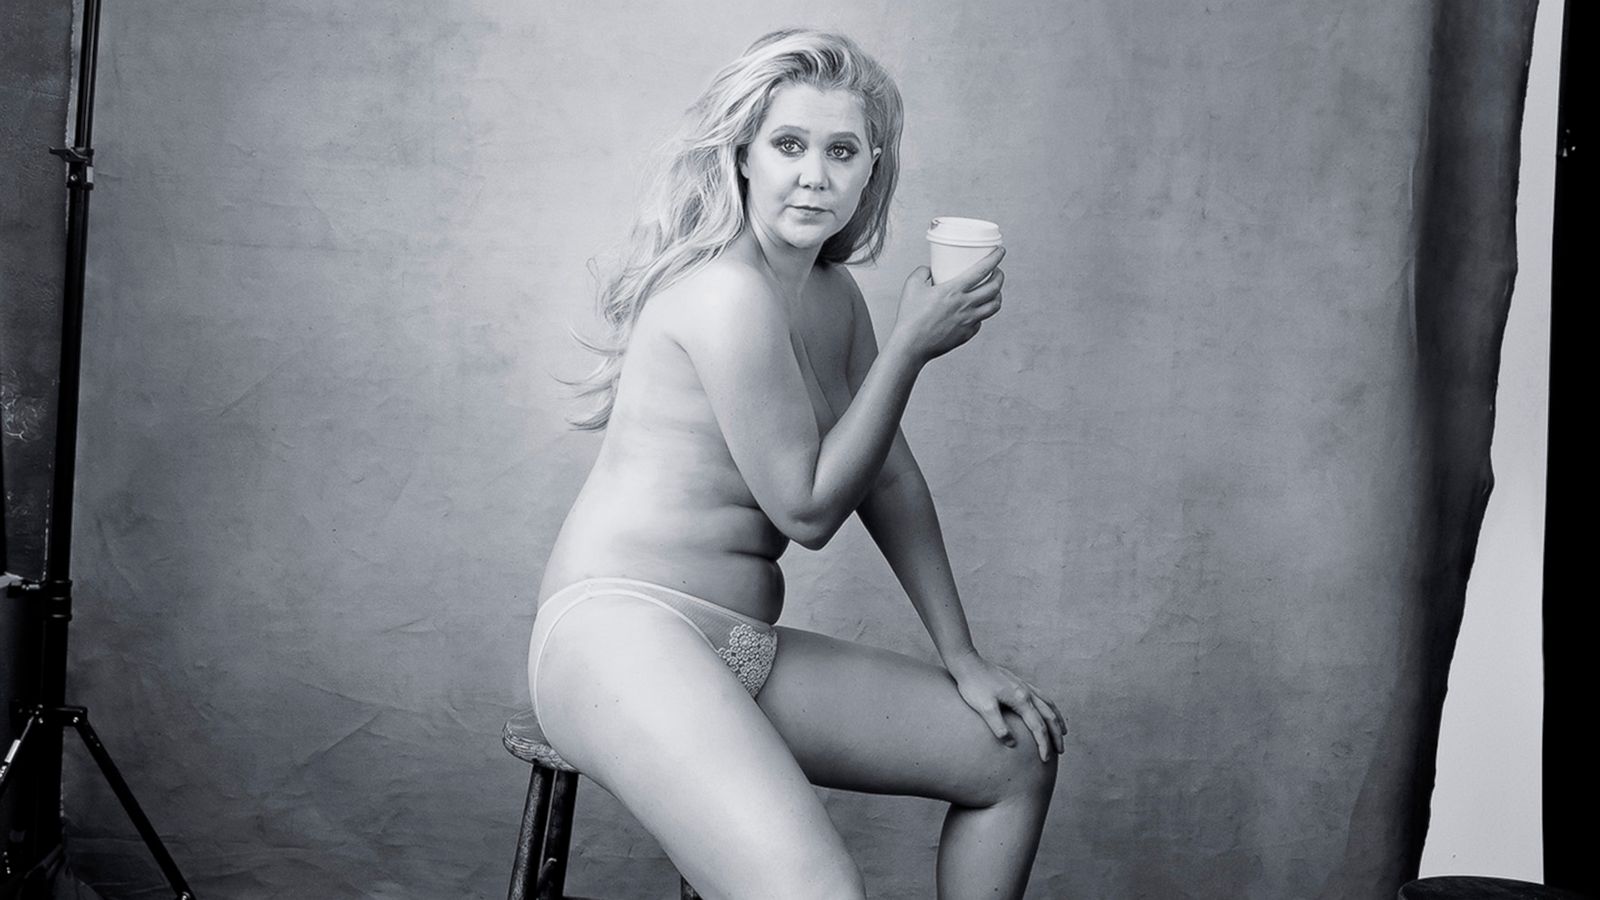 Amy schumer hot pic